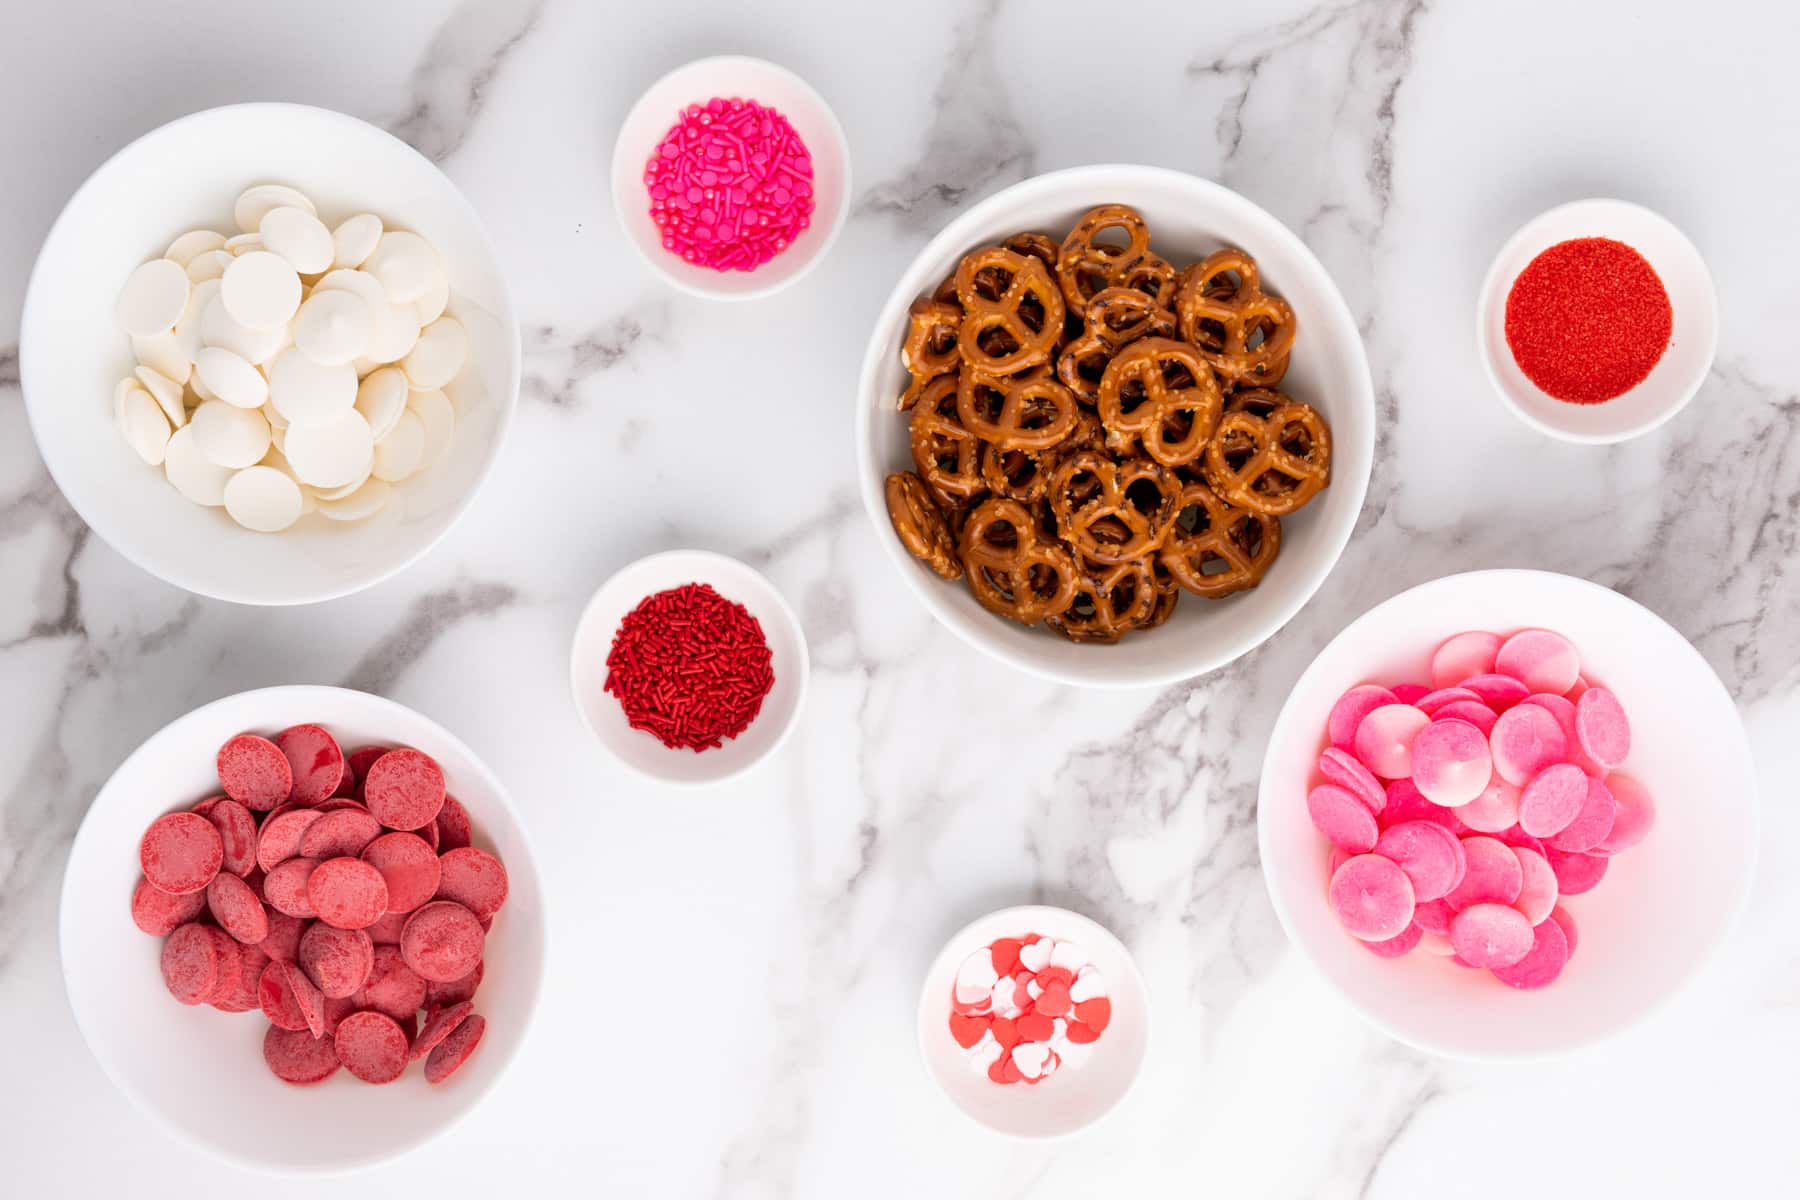 candy melts, pretzel twists and sprinkles in bowls.